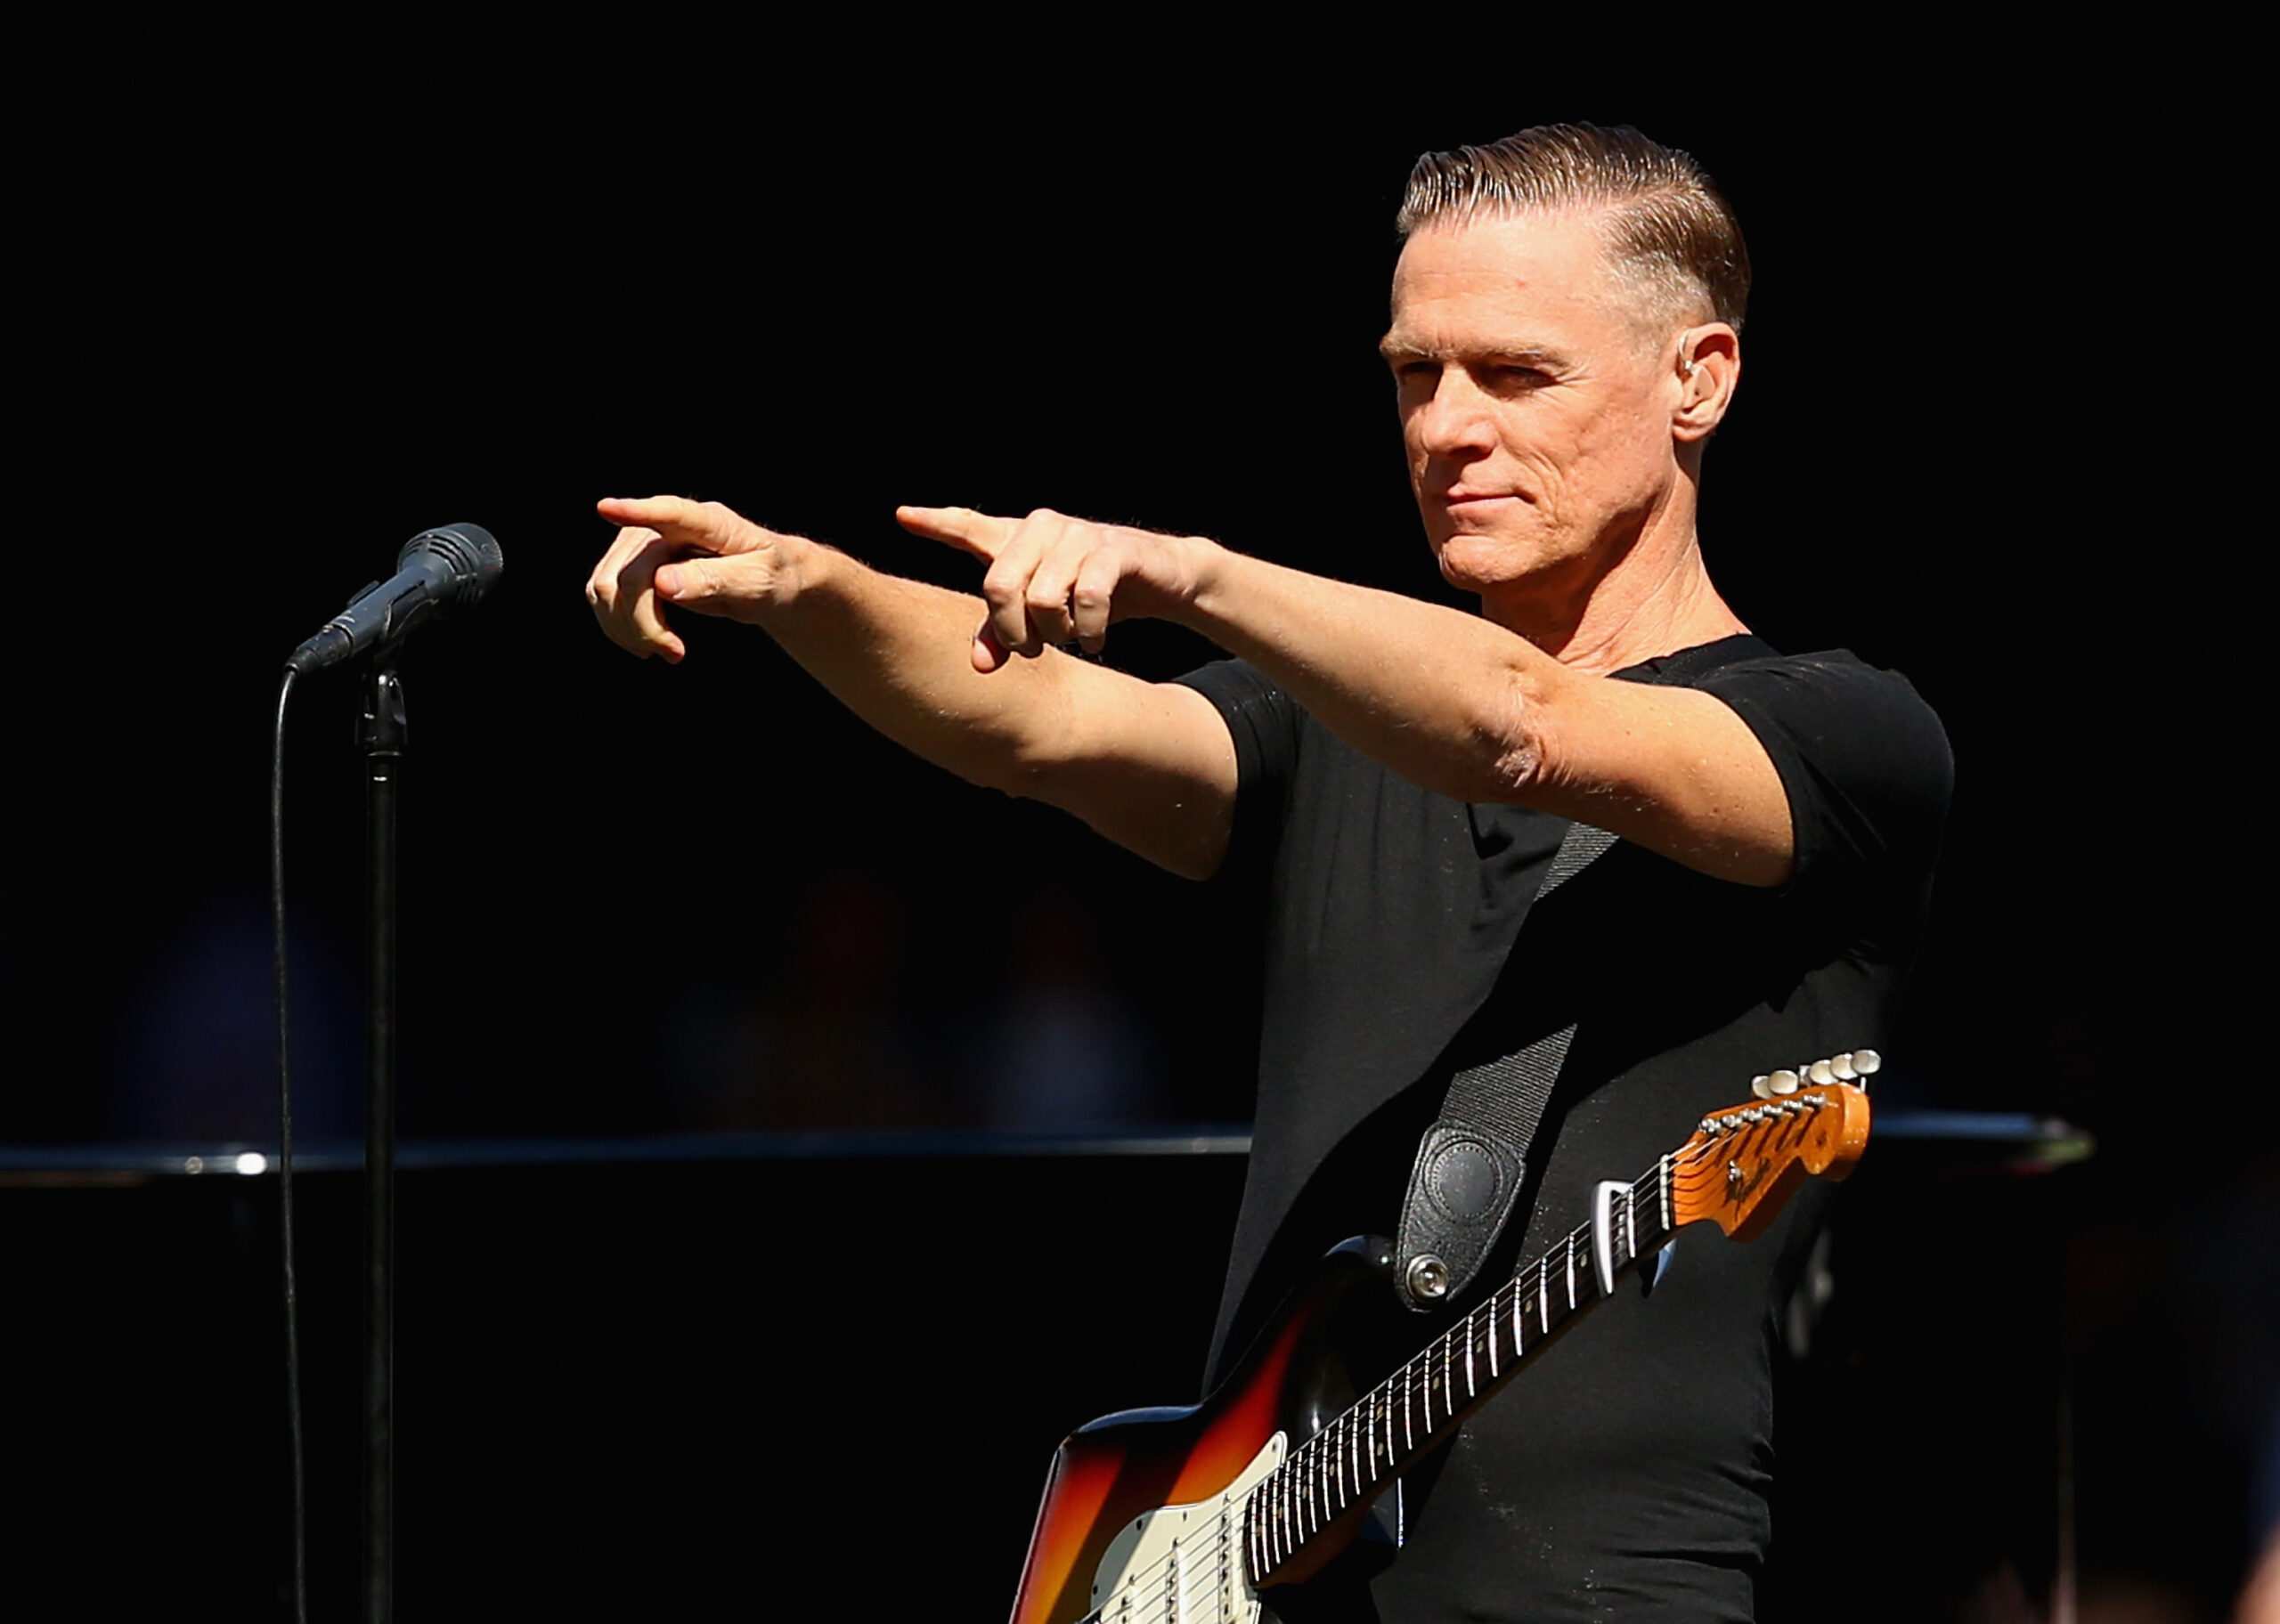 <h1 class="tribe-events-single-event-title">Bryan Adams @ Allstate Arena</h1>